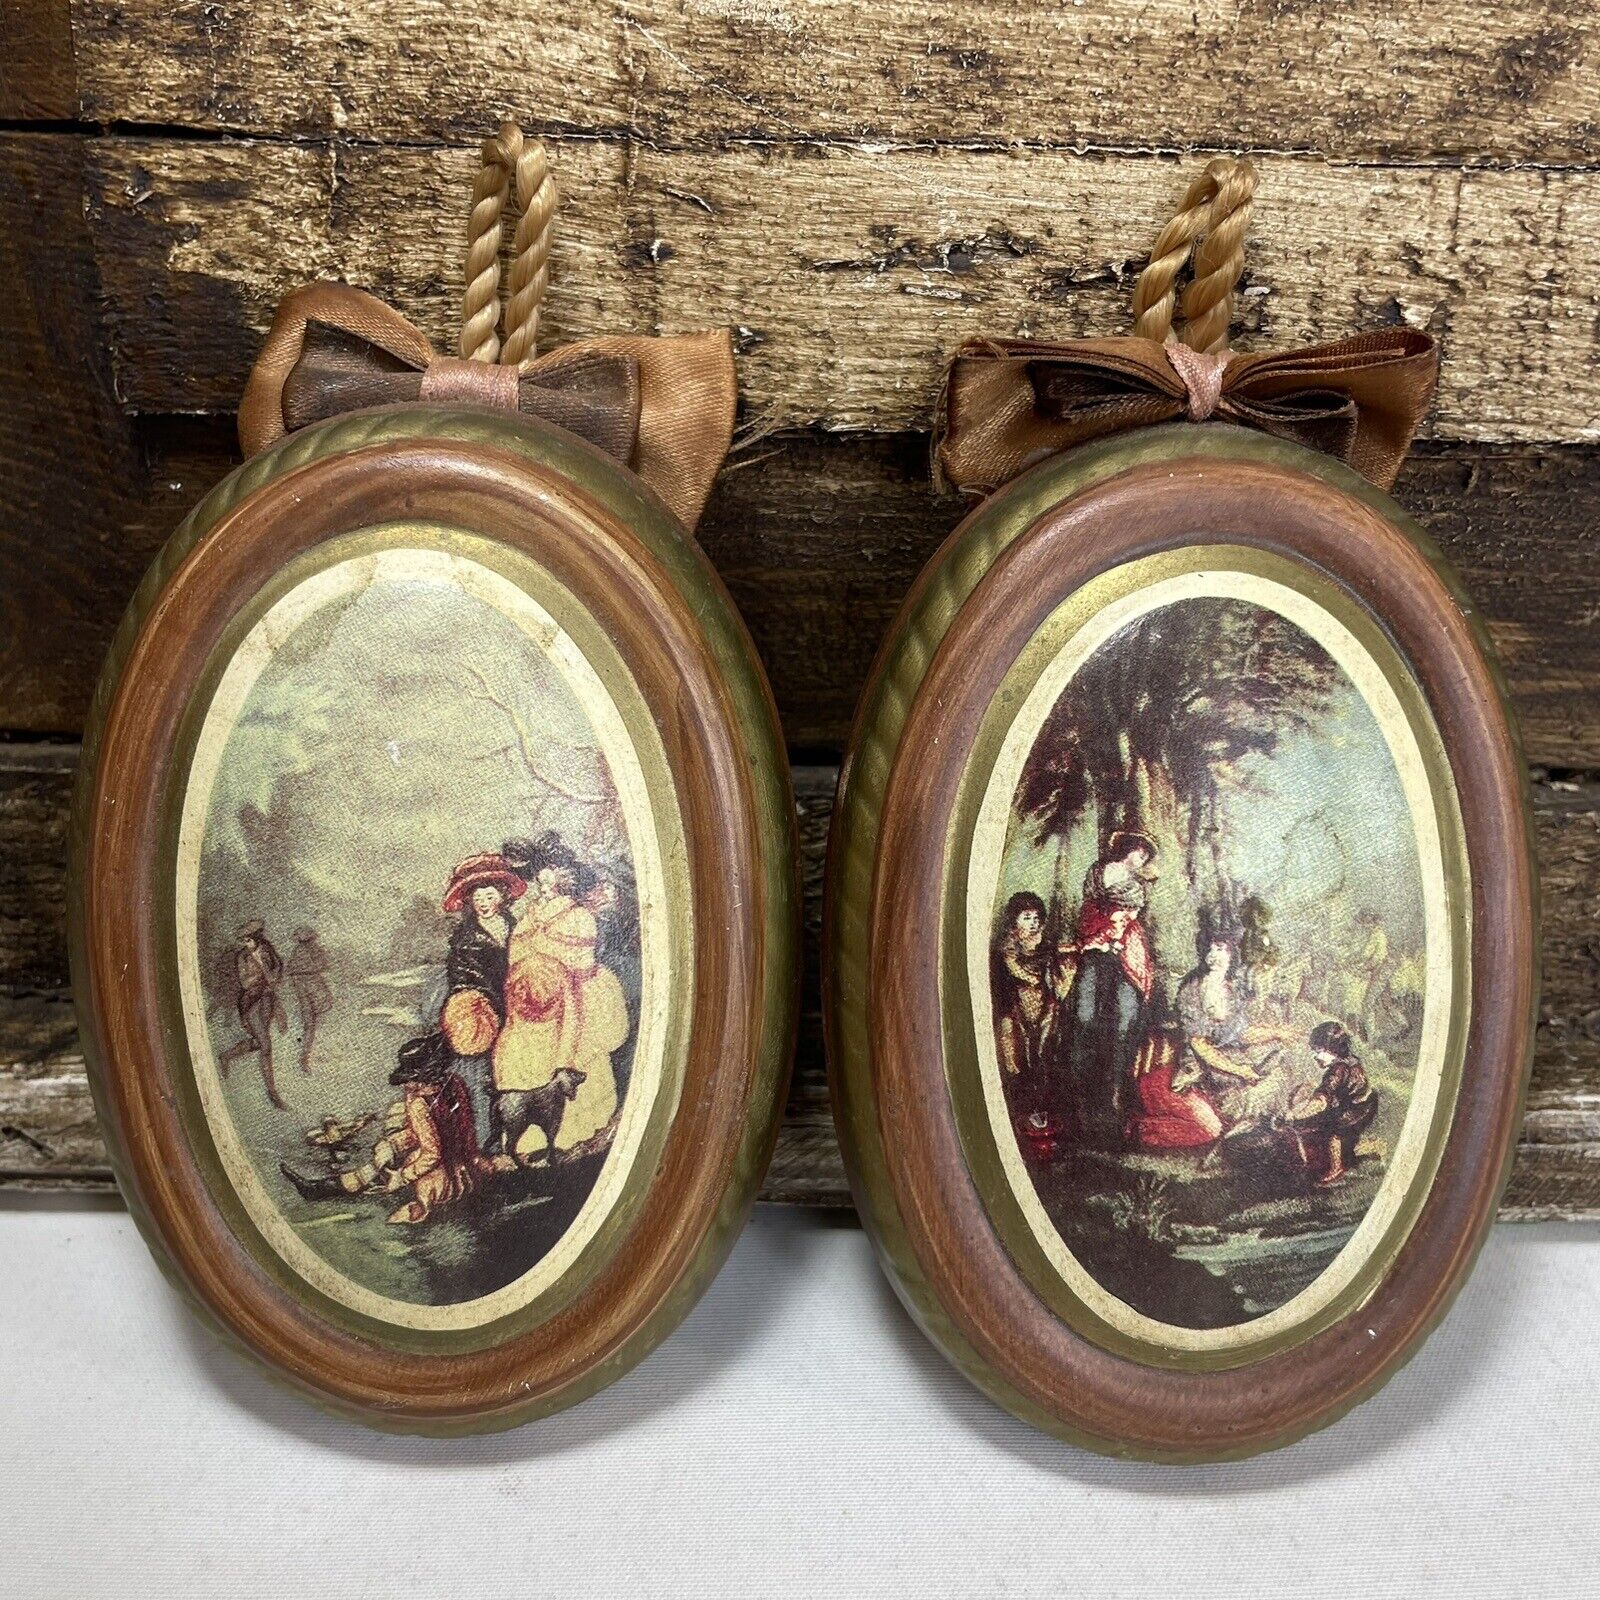 Vintage Victorian Style Oval Wall Plaques Chalkware Set Of 2 —5”